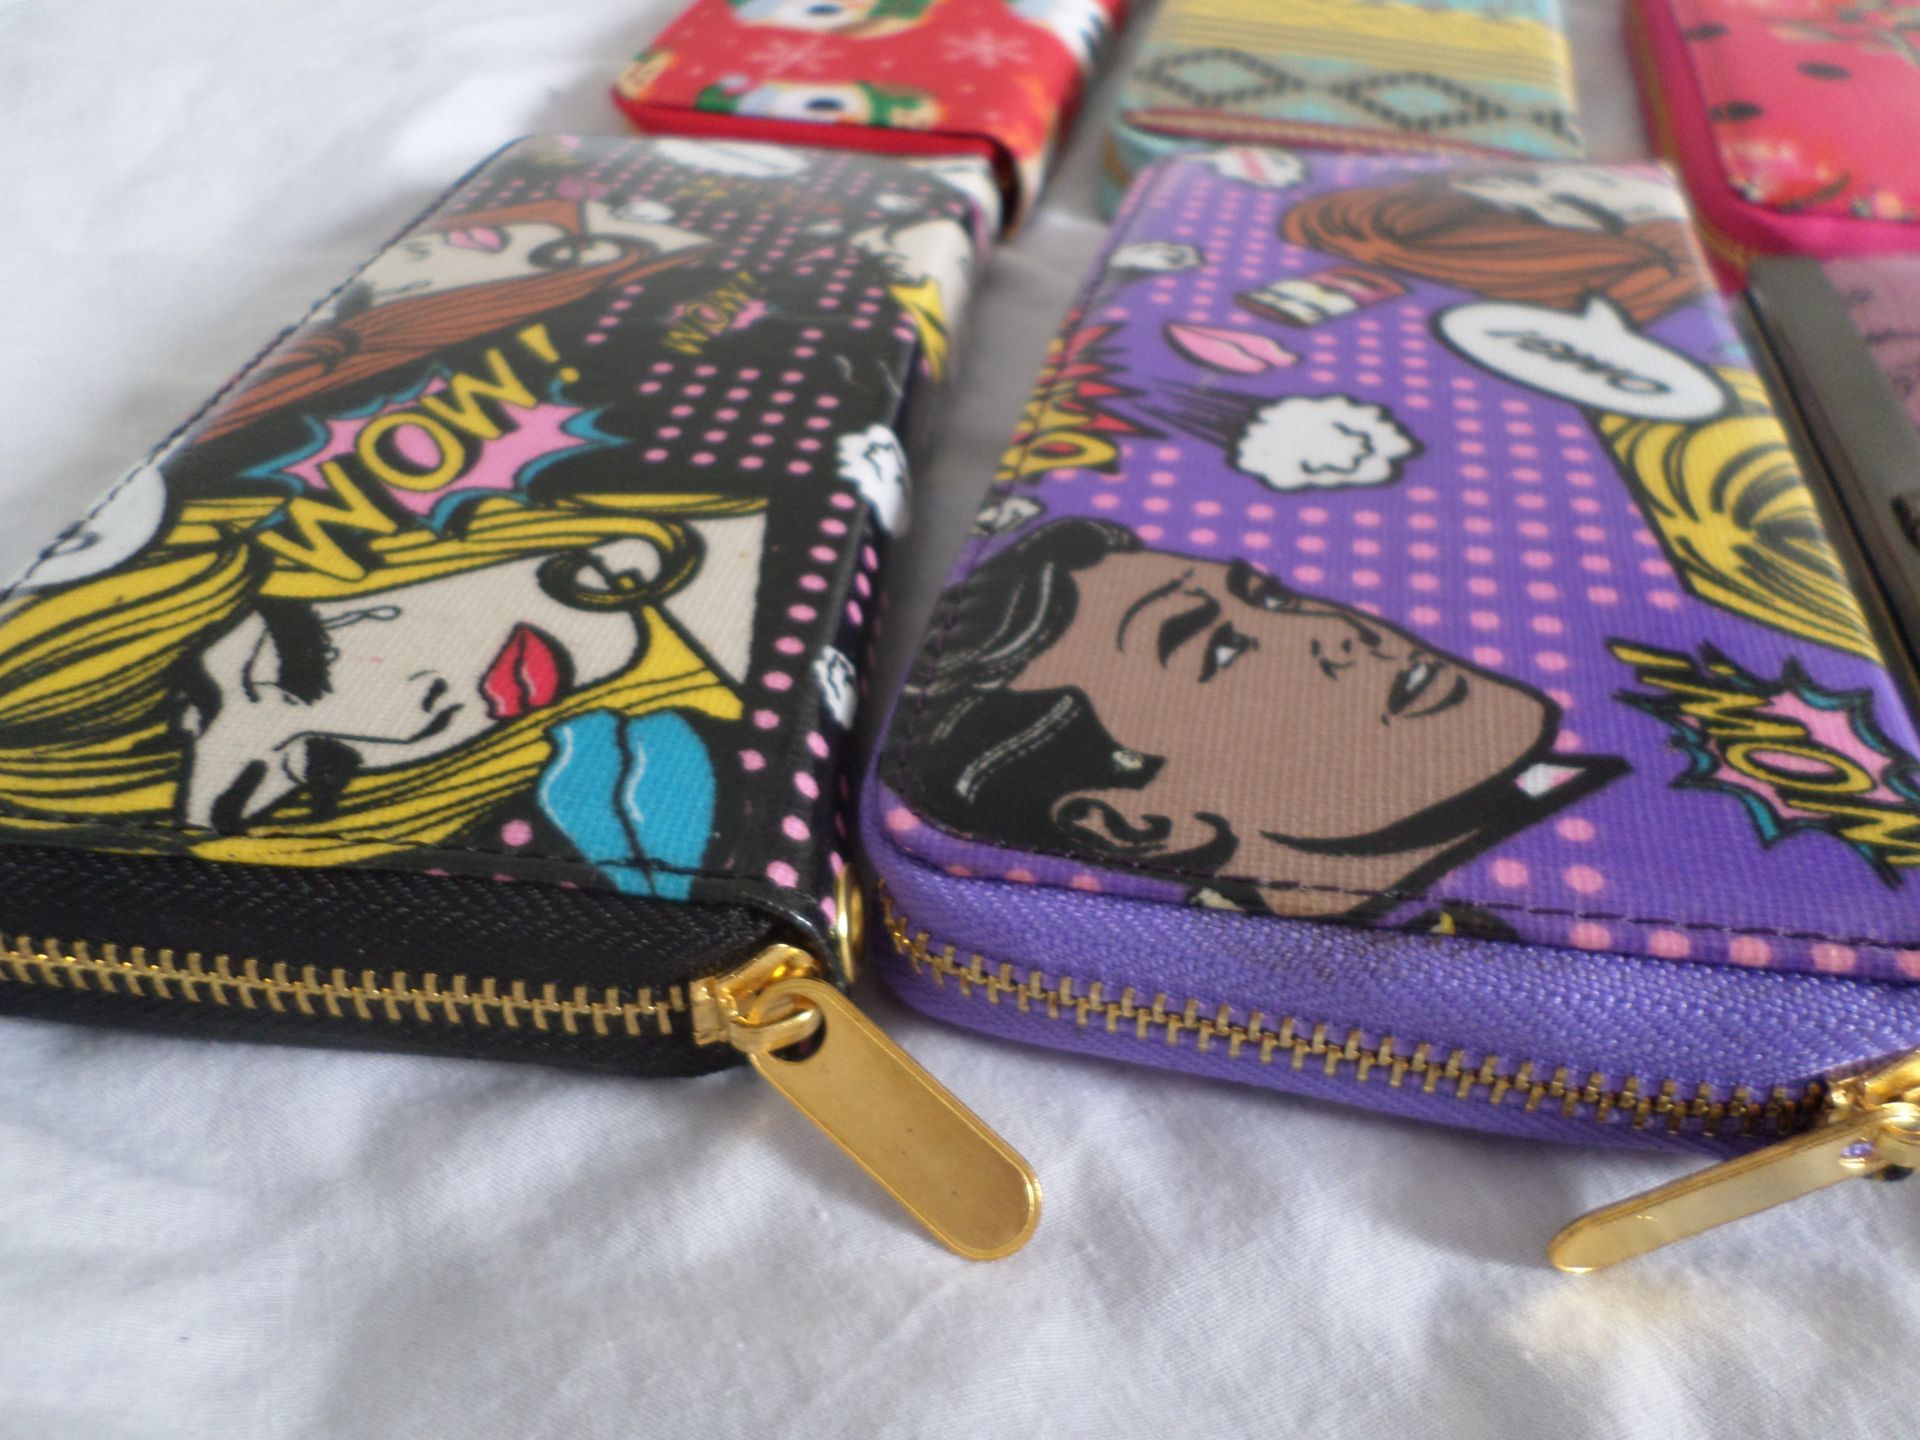 10 x Ladies Clutch/Purses RRP £14 Each. Brand New - Image 4 of 4